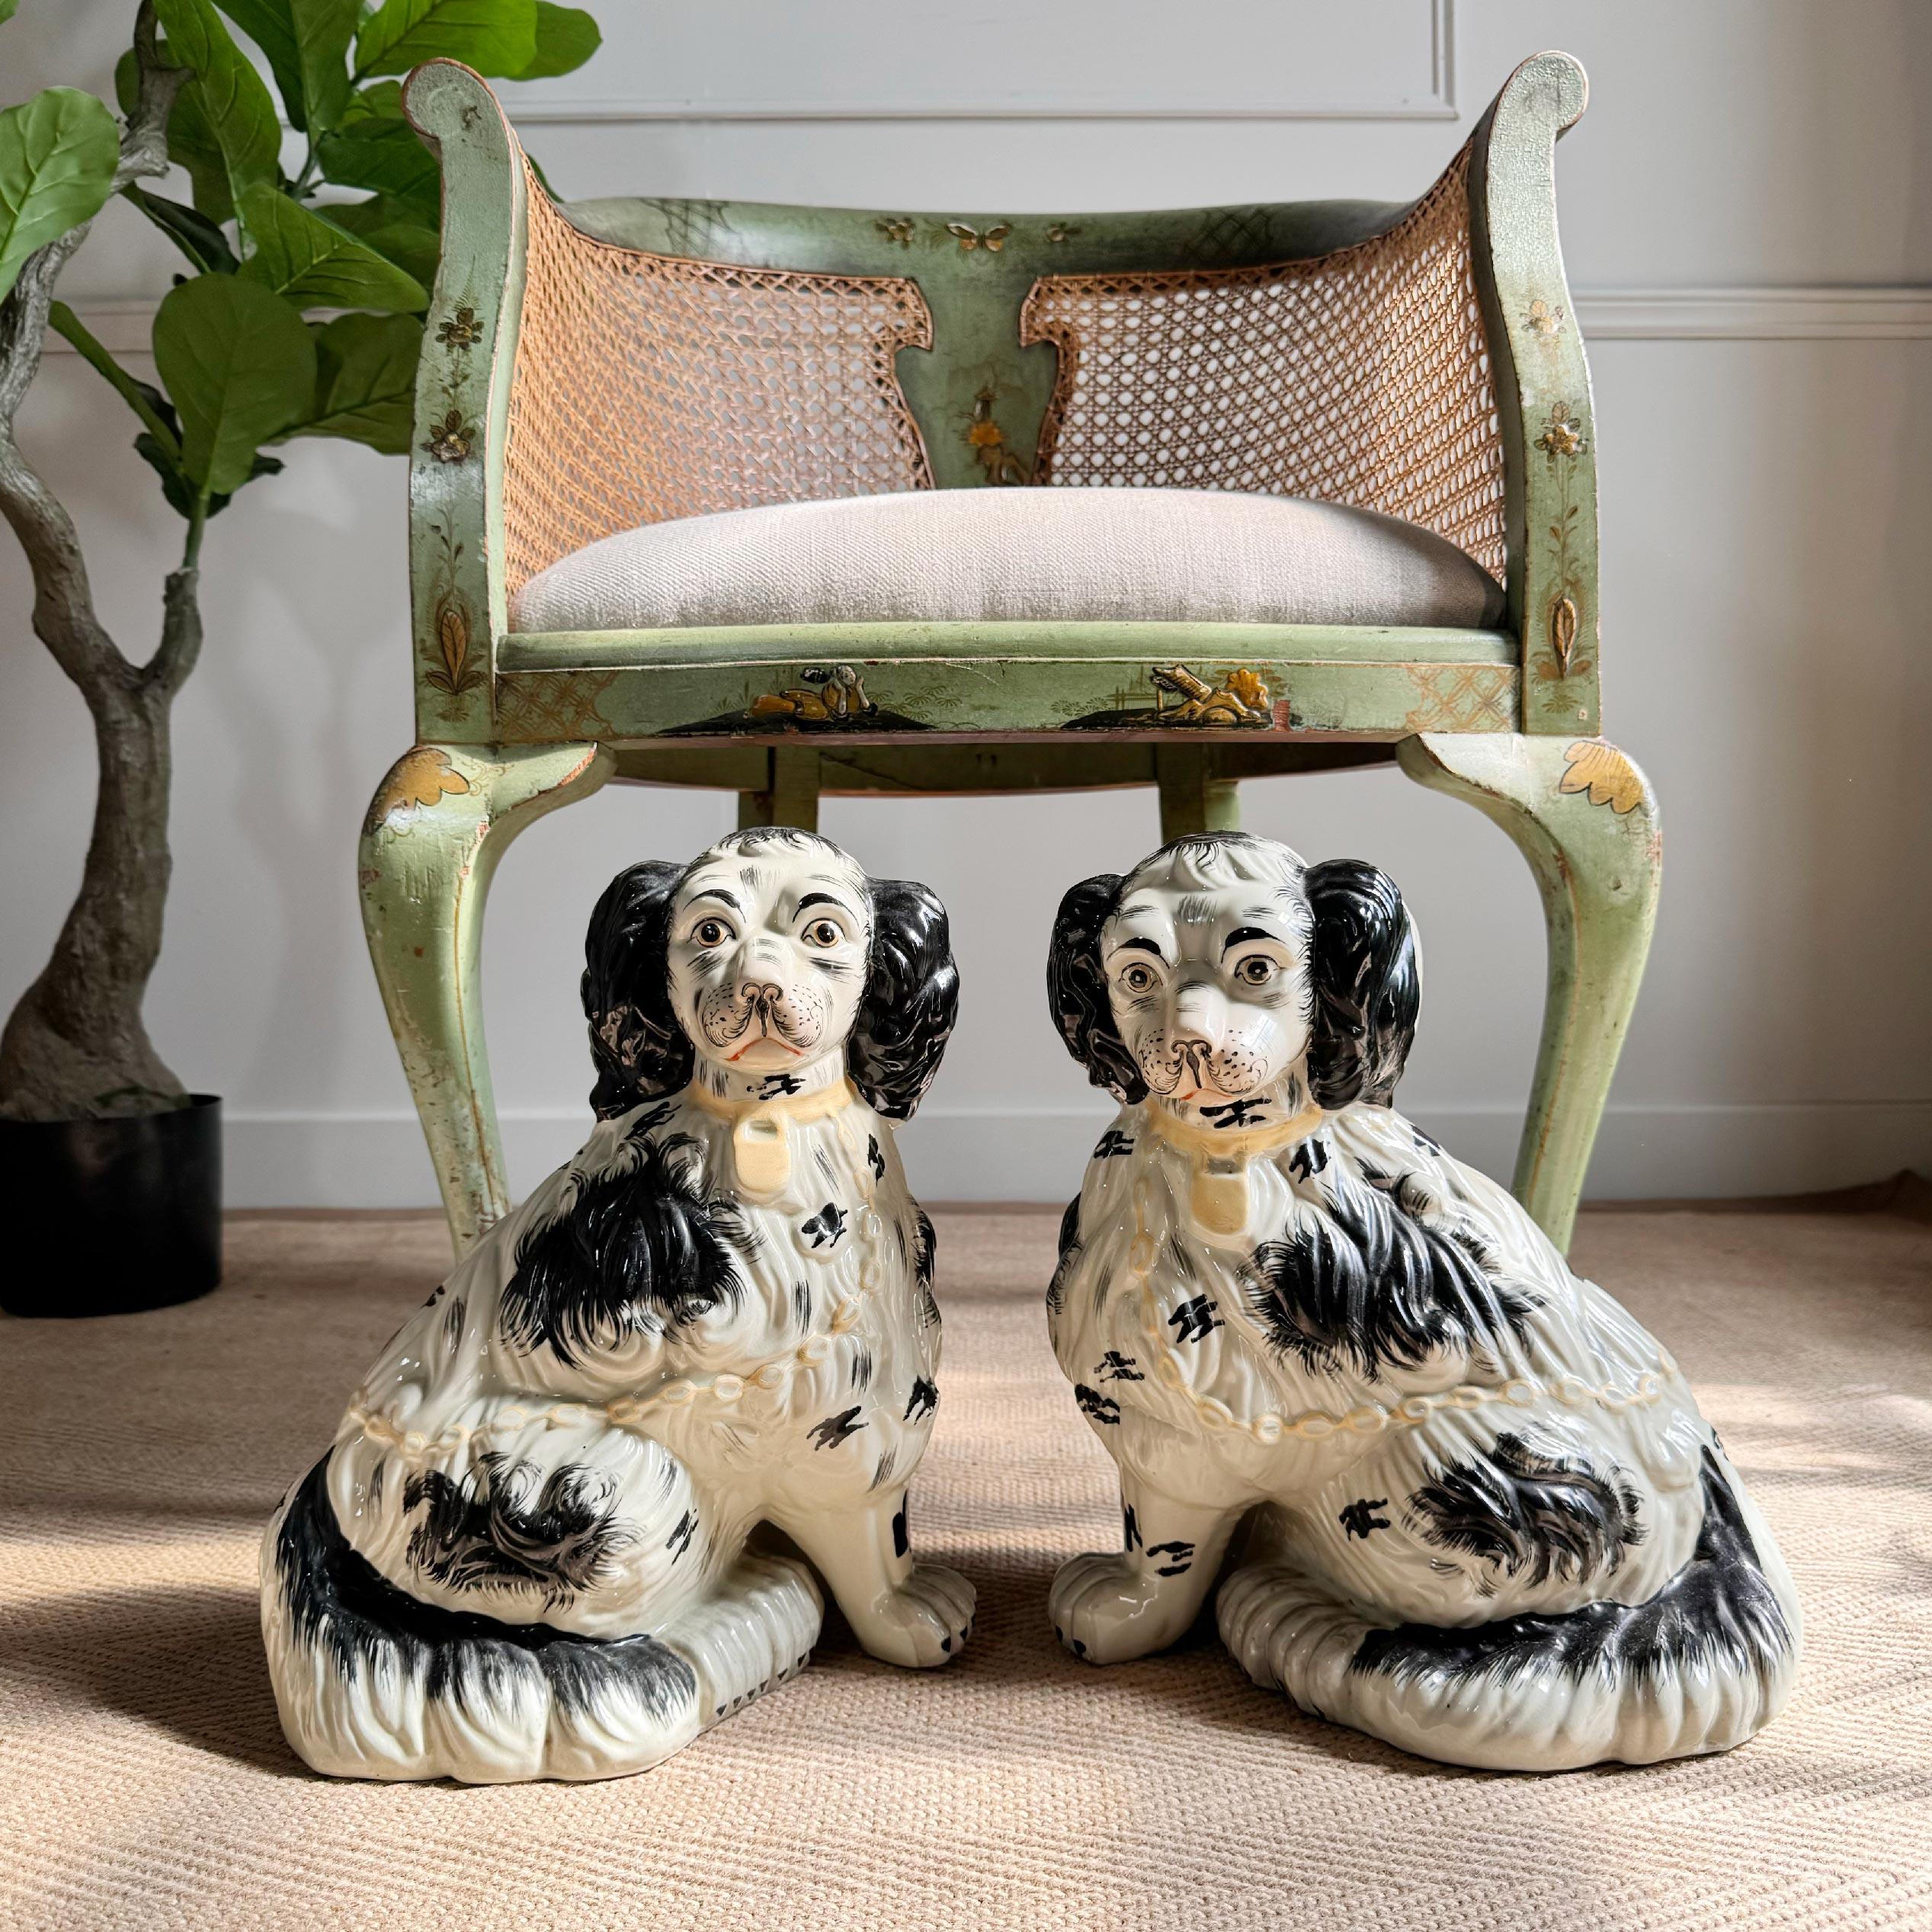  A seated pair of circa 1860 large Staffordshire dogs, textured coats and very well painted, the faces to resemble Kind Charles II moustached face.



These are of great quality and finely decorated.



The original inspiration for the Staffordshire